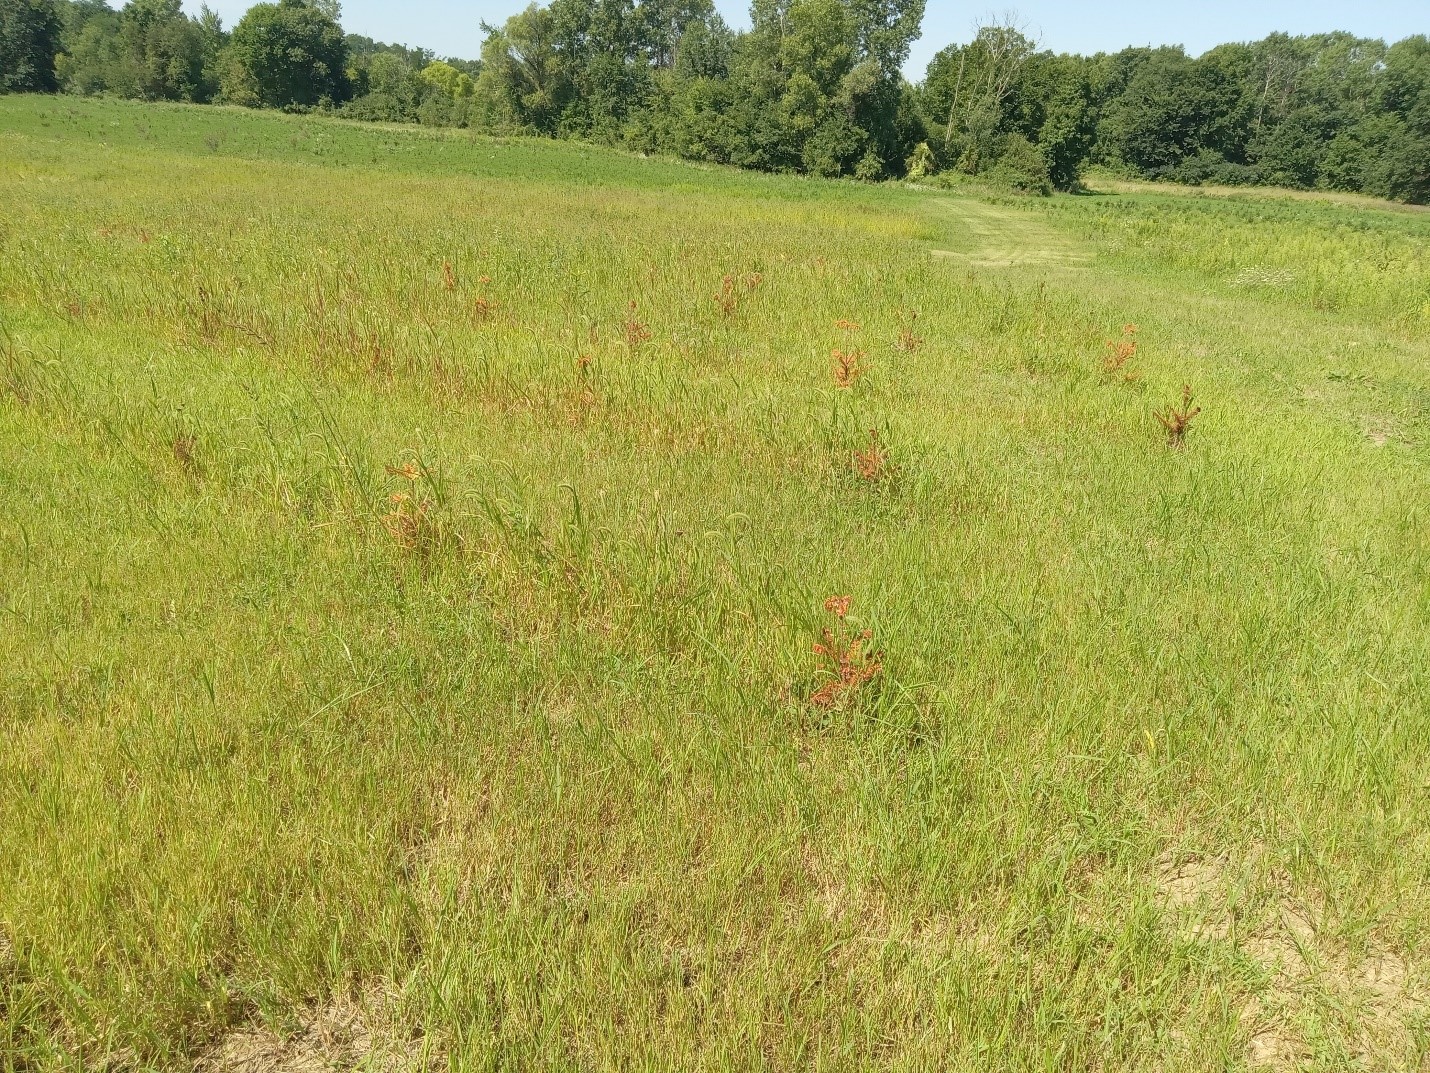 Photo of a sloped field with rows of dead Christmas tree transplants poking out of the tall weeds. Christmas trees are vulnerable to weed pressure during the establishment stage.